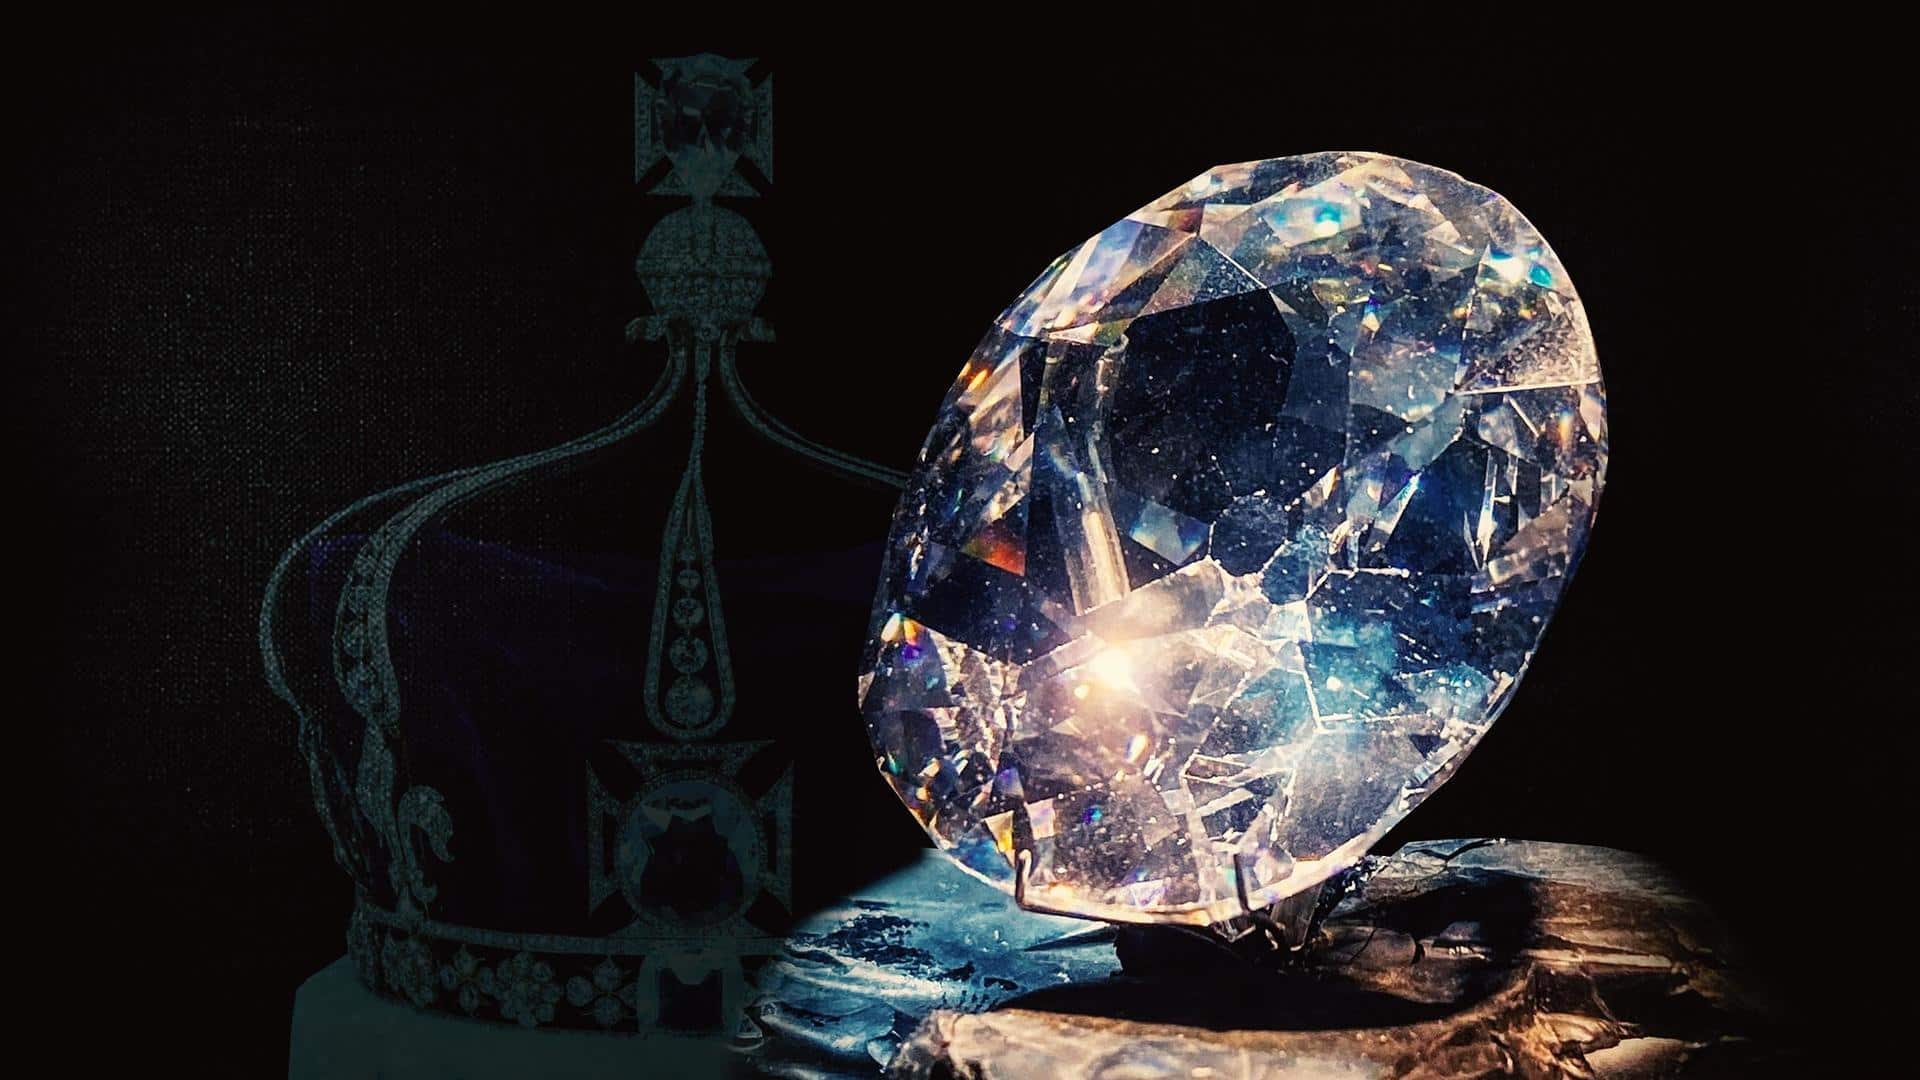 5 interesting facts about the Kohinoor diamond